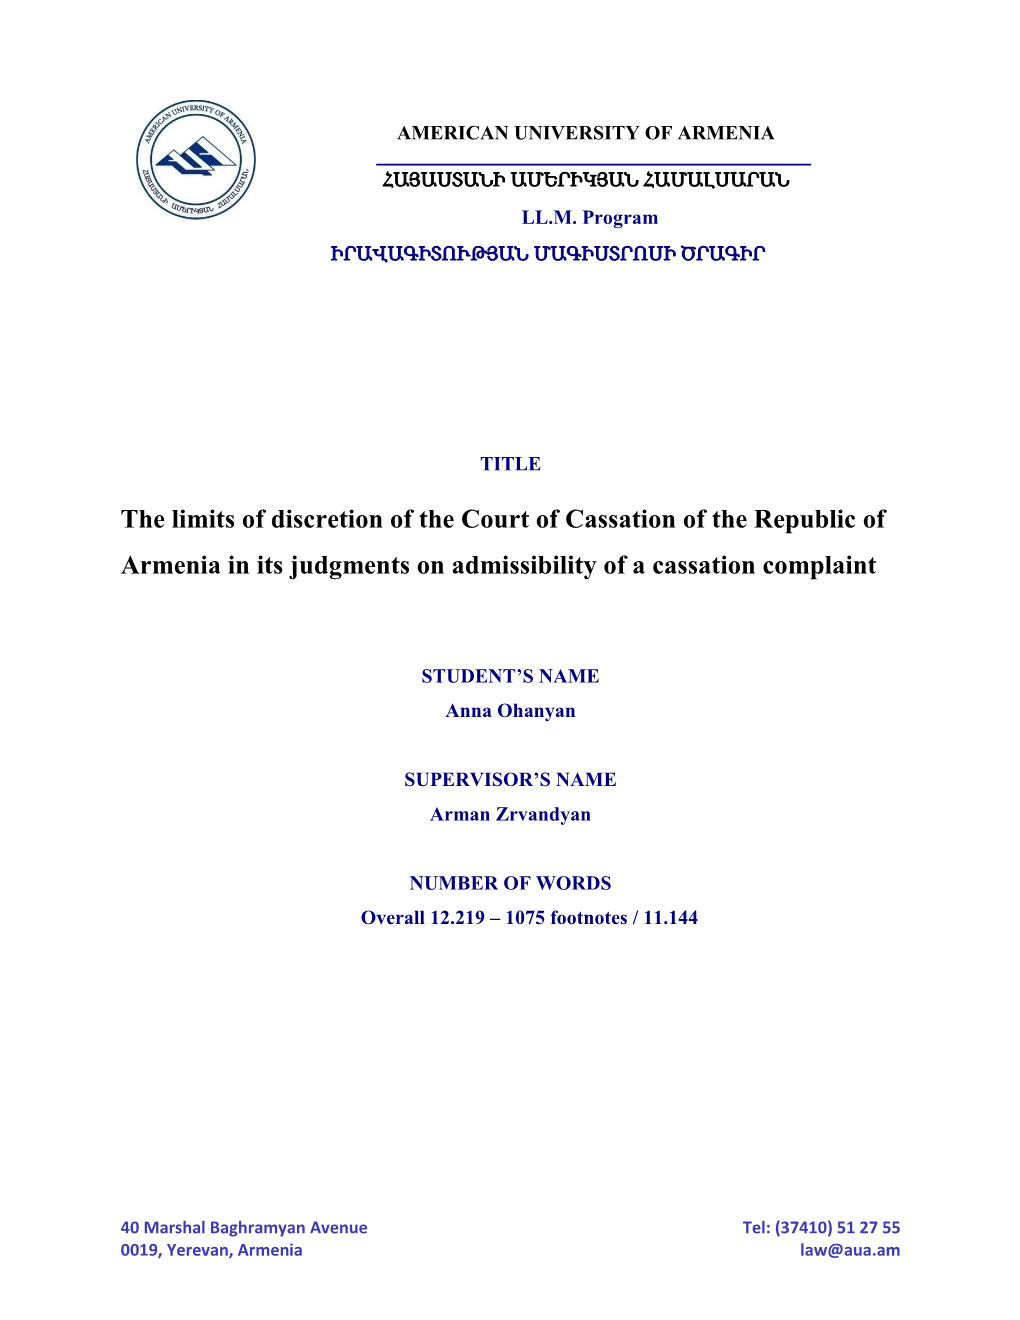 The Limits of Discretion of the Court of Cassation of the Republic of Armenia in Its Judgments on Admissibility of a Cassation Complaint